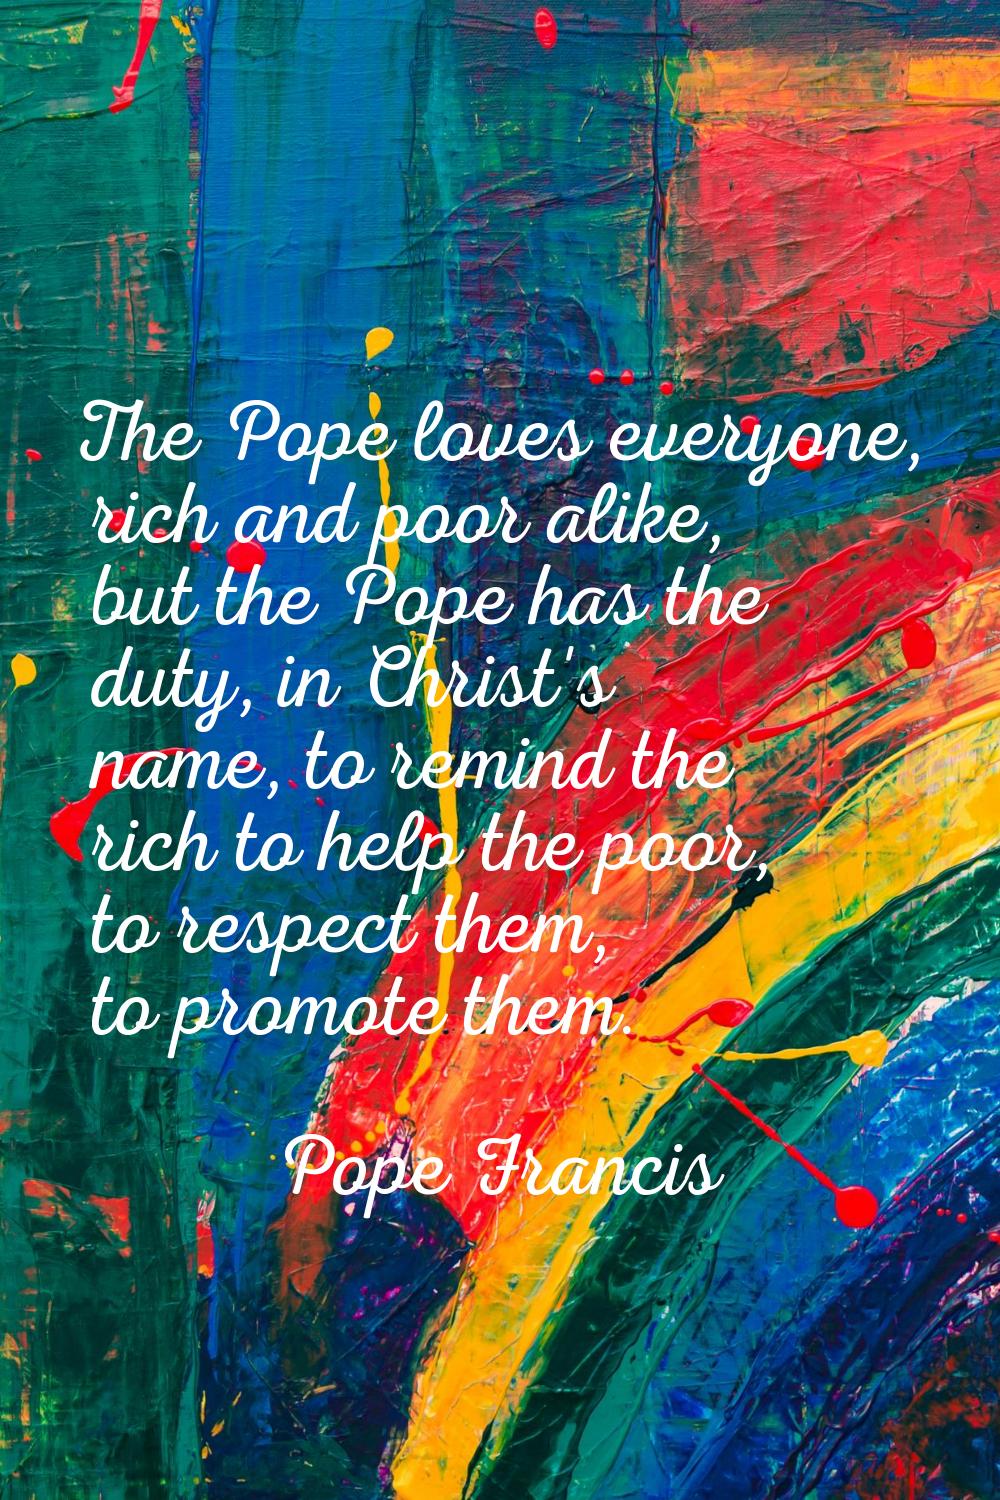 The Pope loves everyone, rich and poor alike, but the Pope has the duty, in Christ's name, to remin